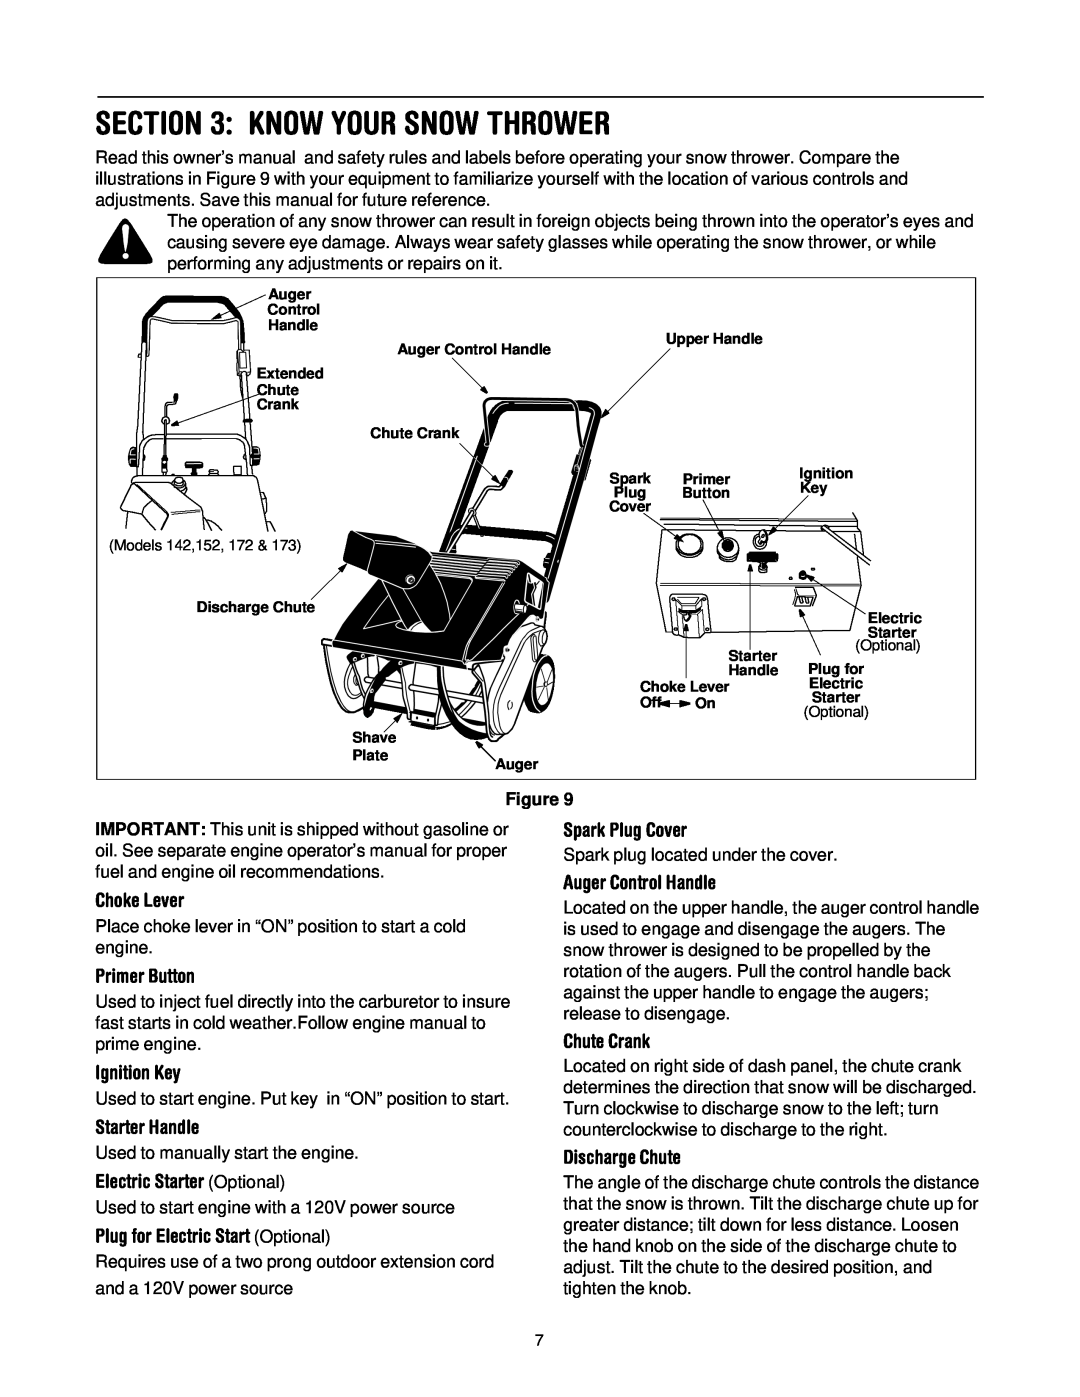 MTD Series 140 through E173 manual Know Your Snow Thrower 